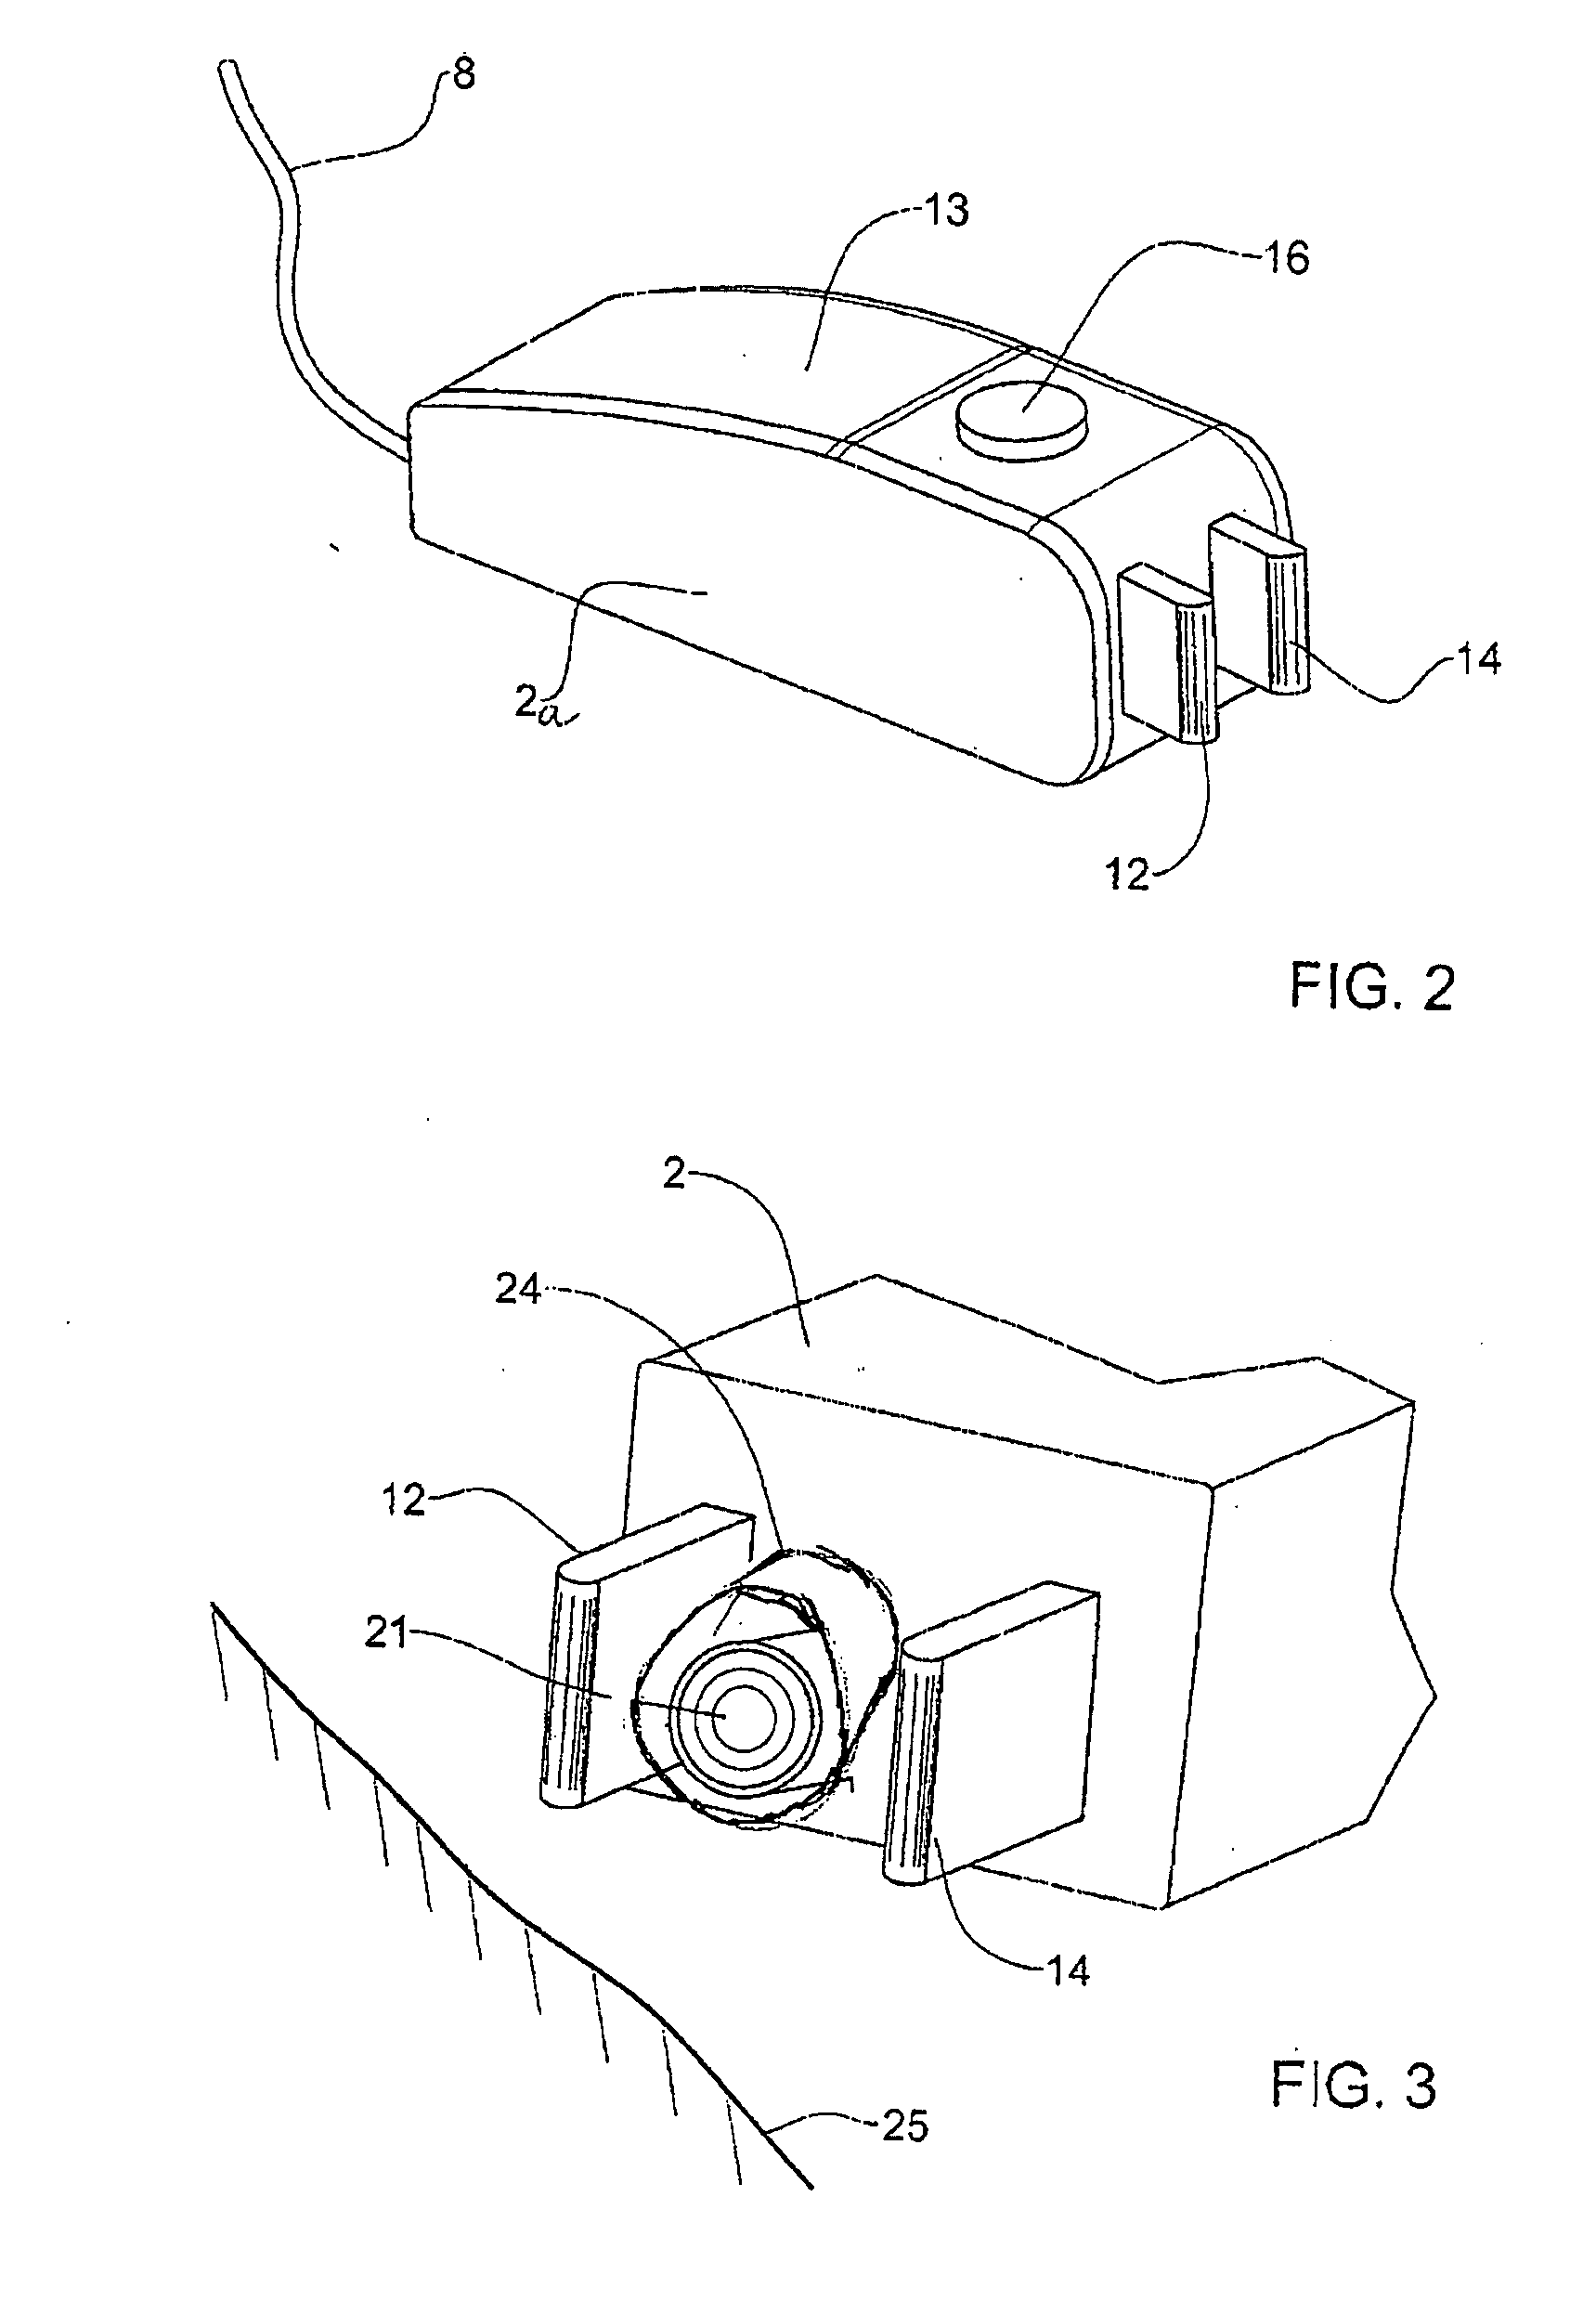 Device and method for treating skin with temperature control